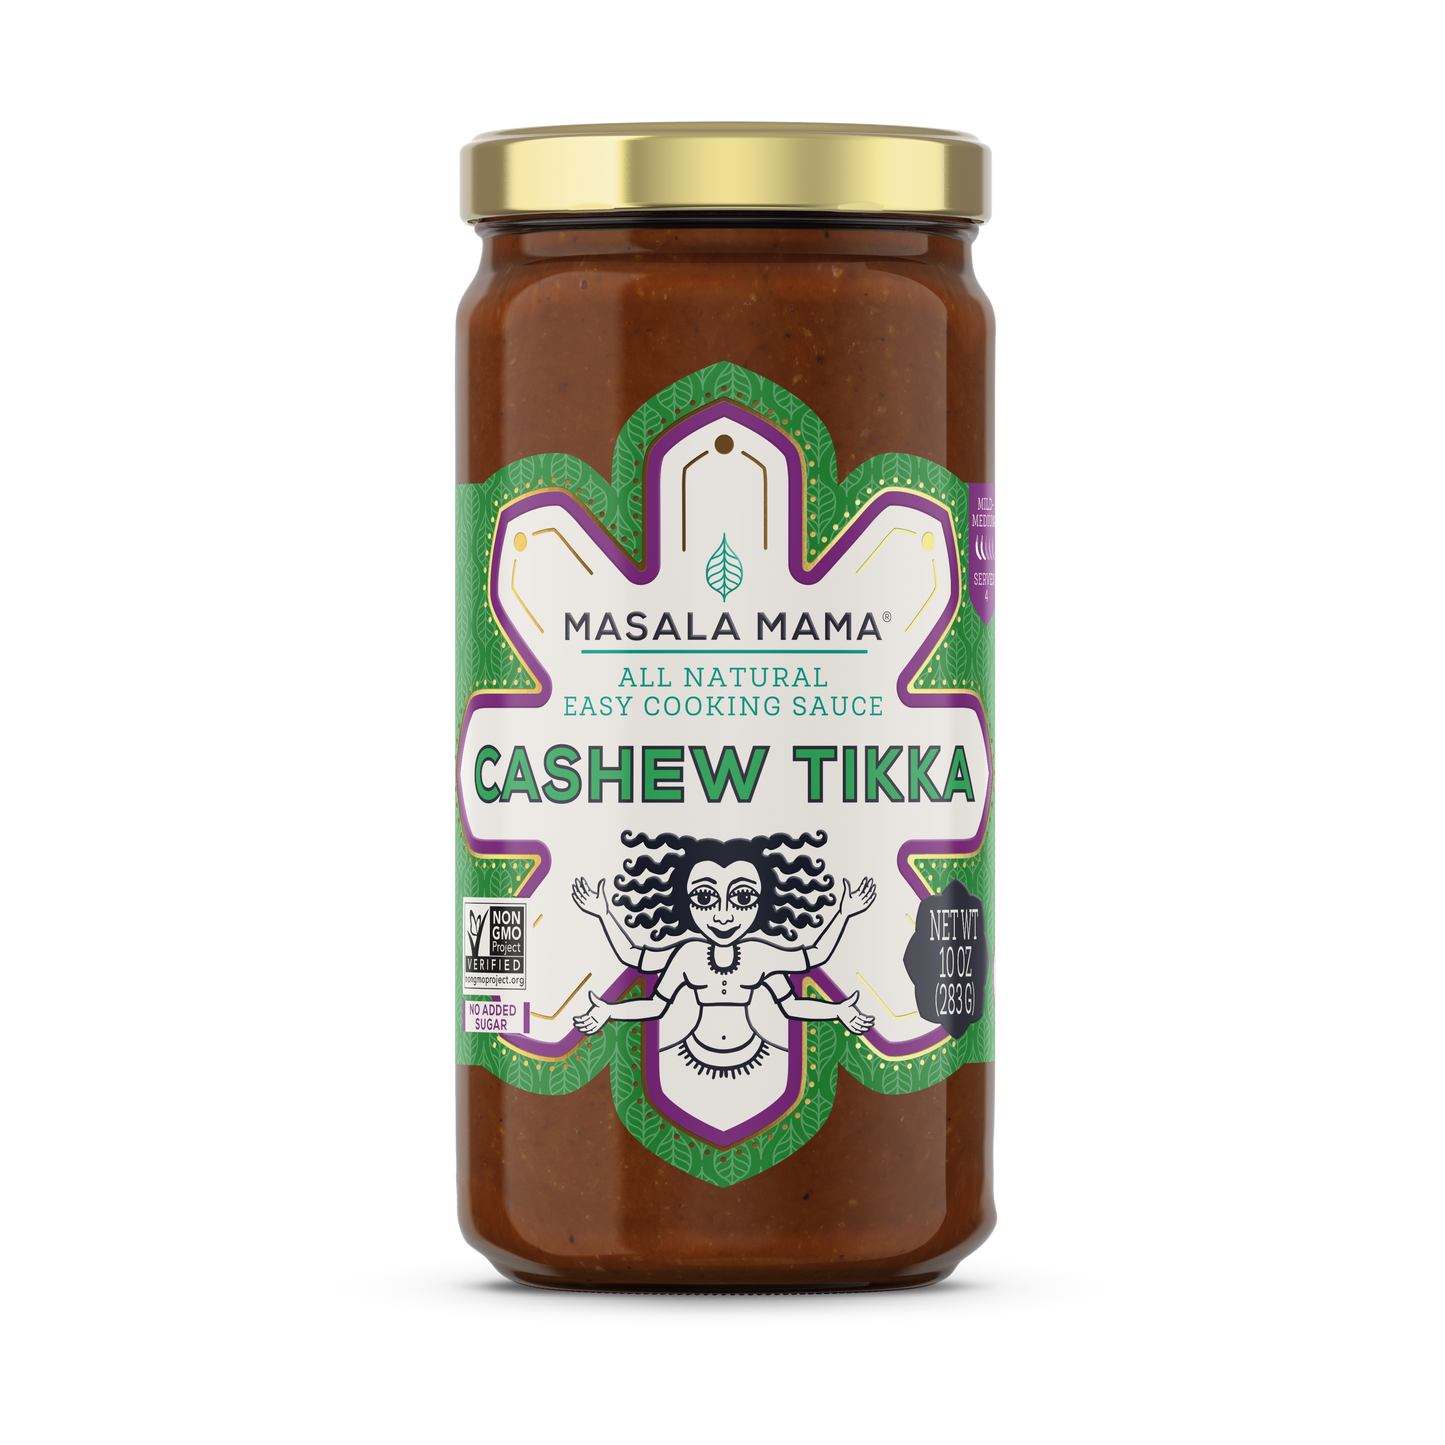 Cashew Tikka - All Natural Easy Cooking Sauce